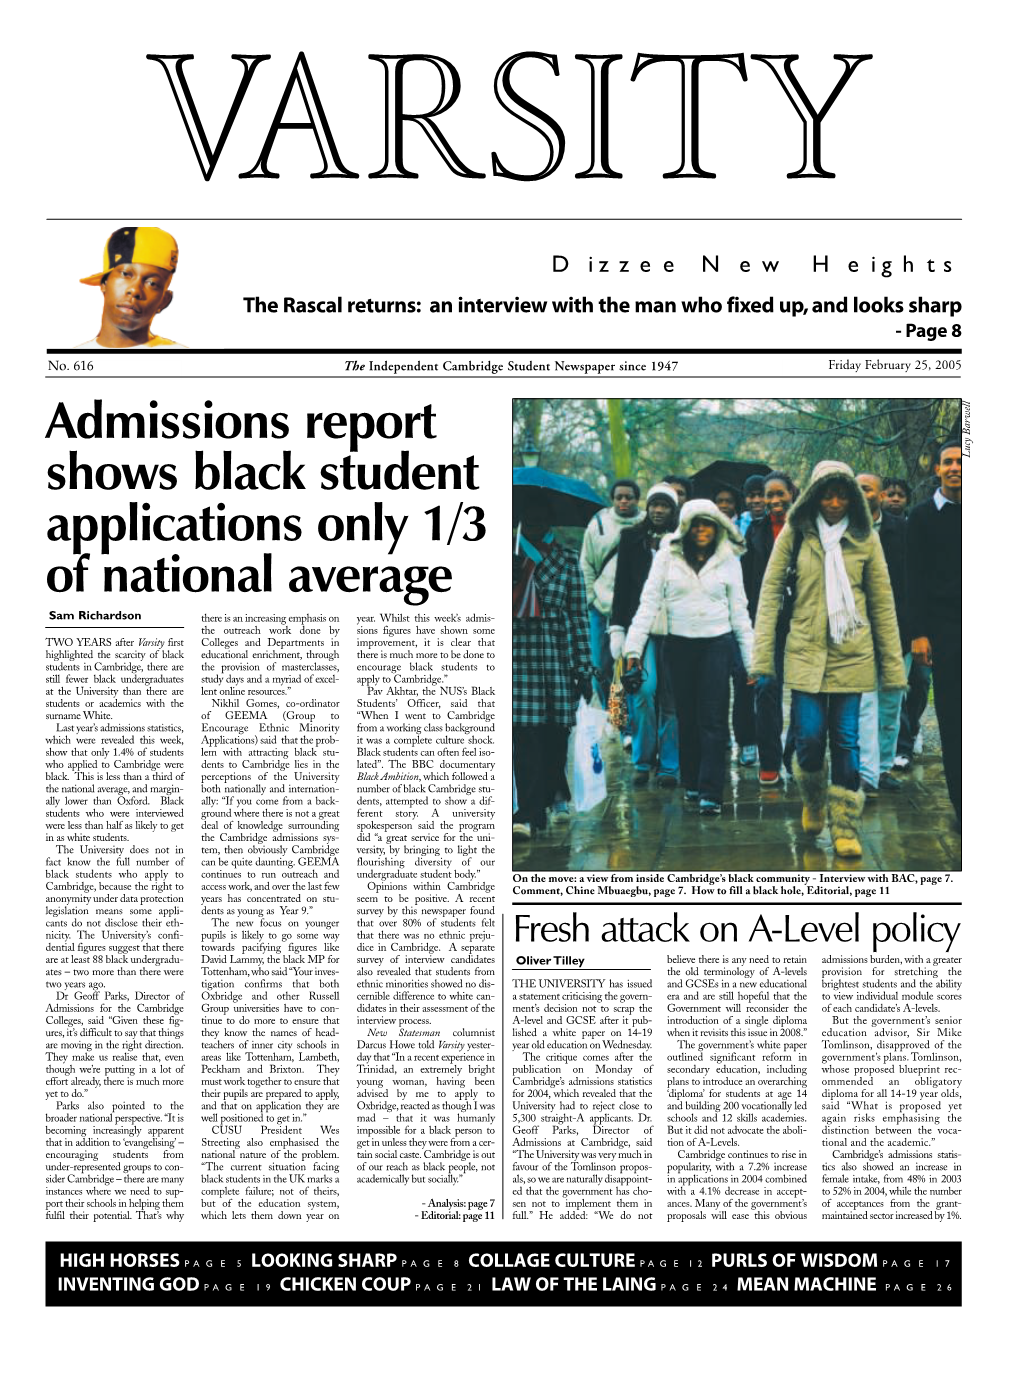 Admissions Report Shows Black Student Applications Only 1/3 Of